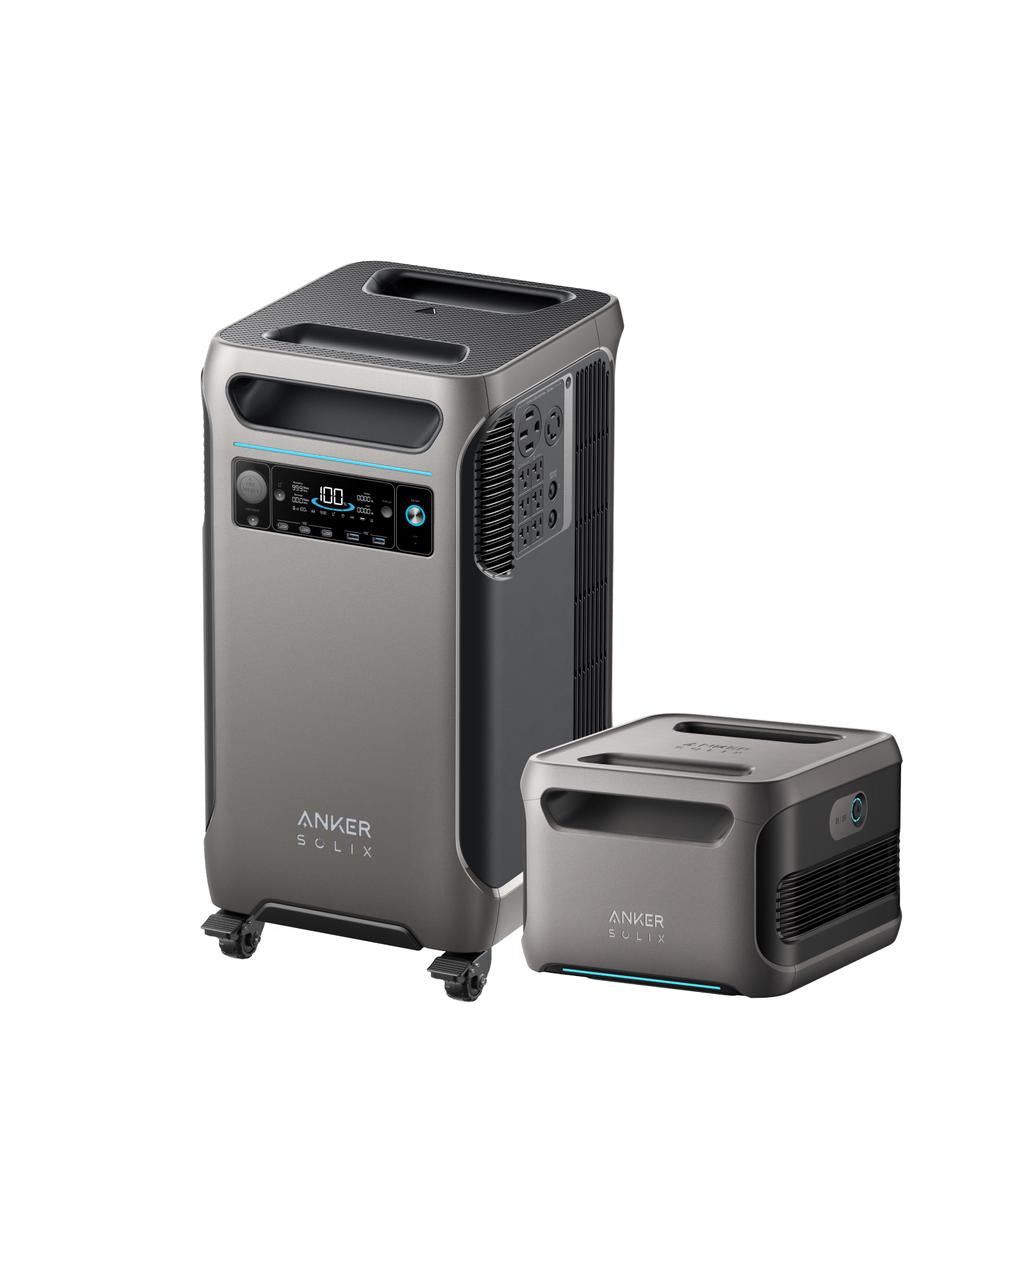 Subscriber Offer | Anker SOLIX F3800 + Expansion Battery 7680Wh | 6000W